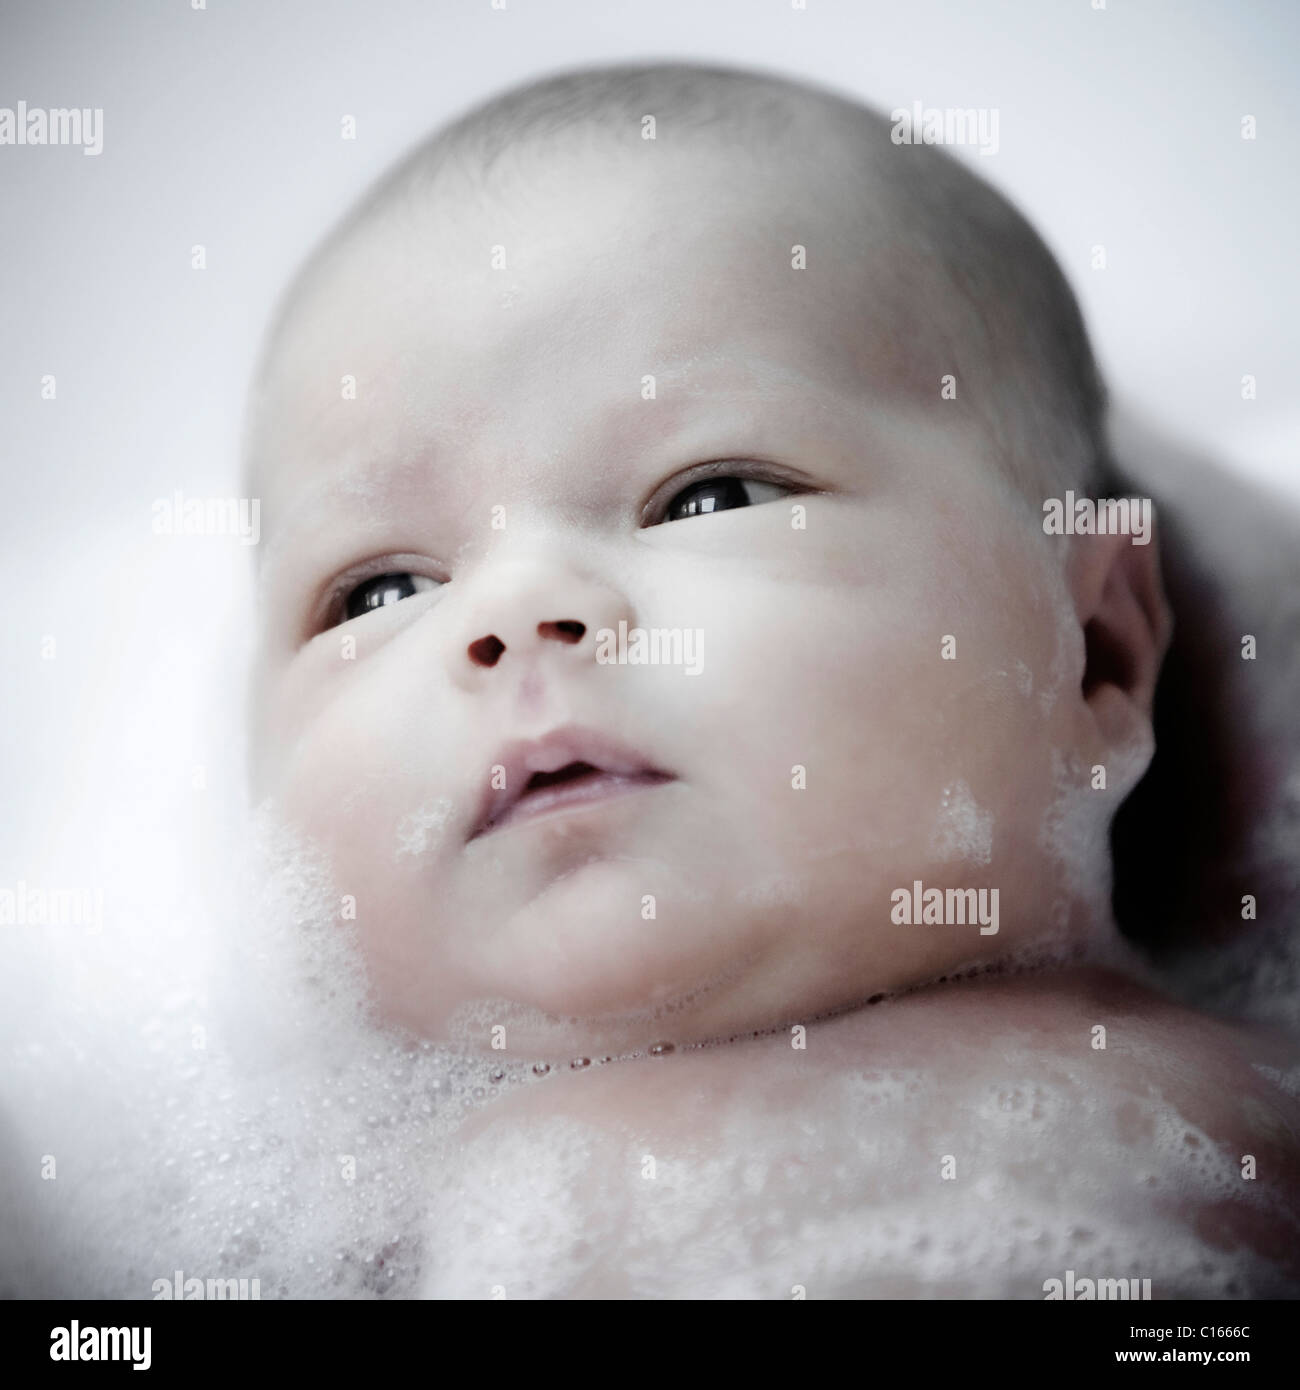 A newborn baby in a bubble bath head and shoulders Stock Photo